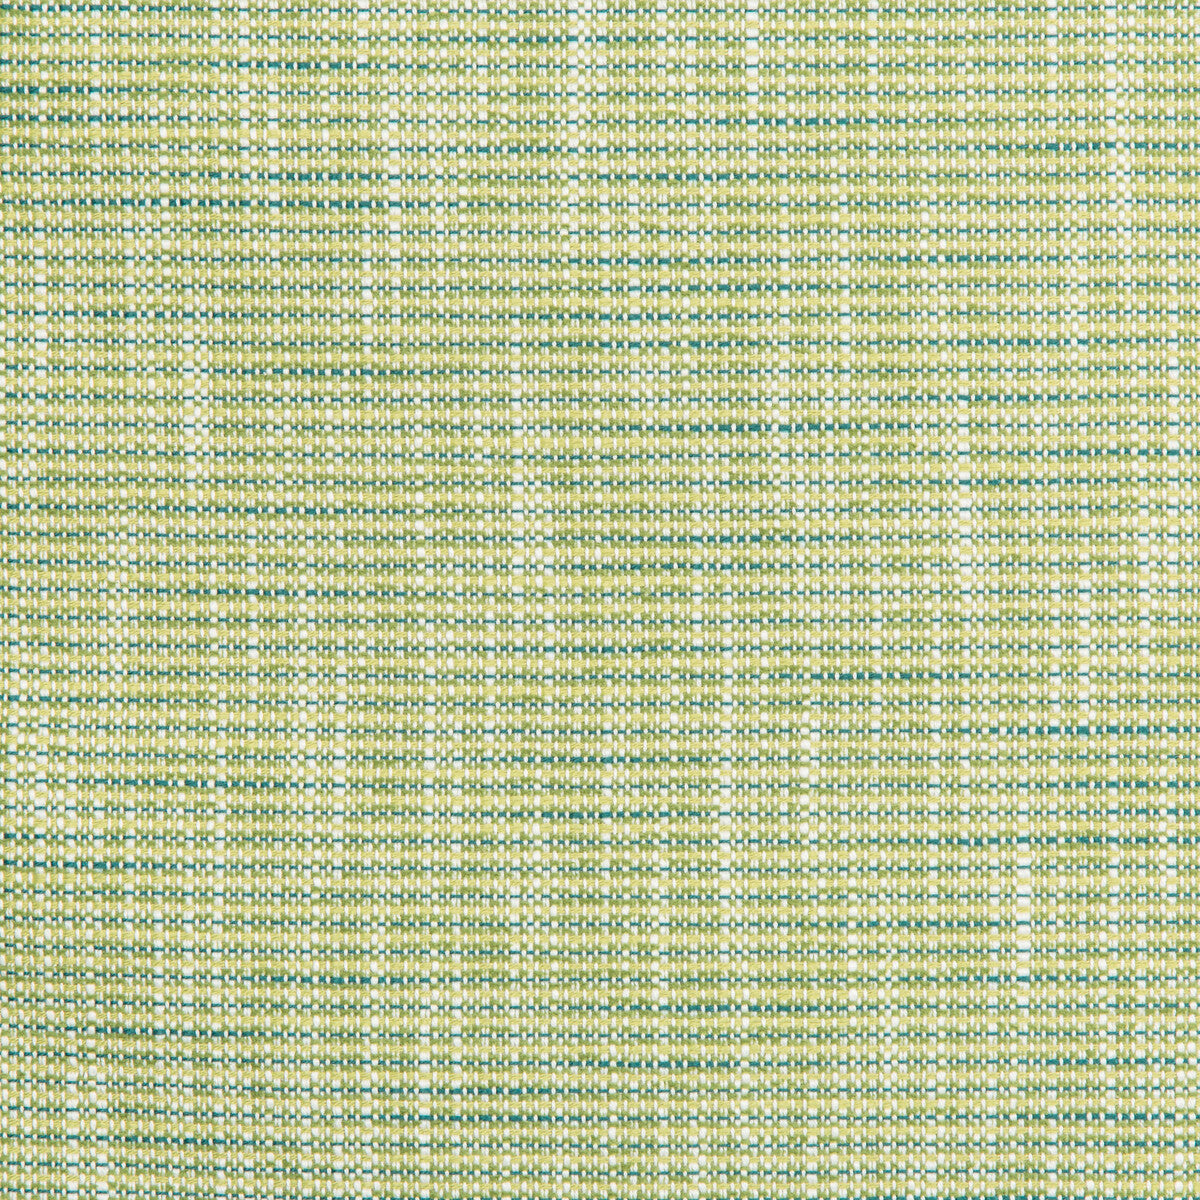 River Park fabric in hillside color - pattern 35866.13.0 - by Kravet Contract in the Gis Crypton collection